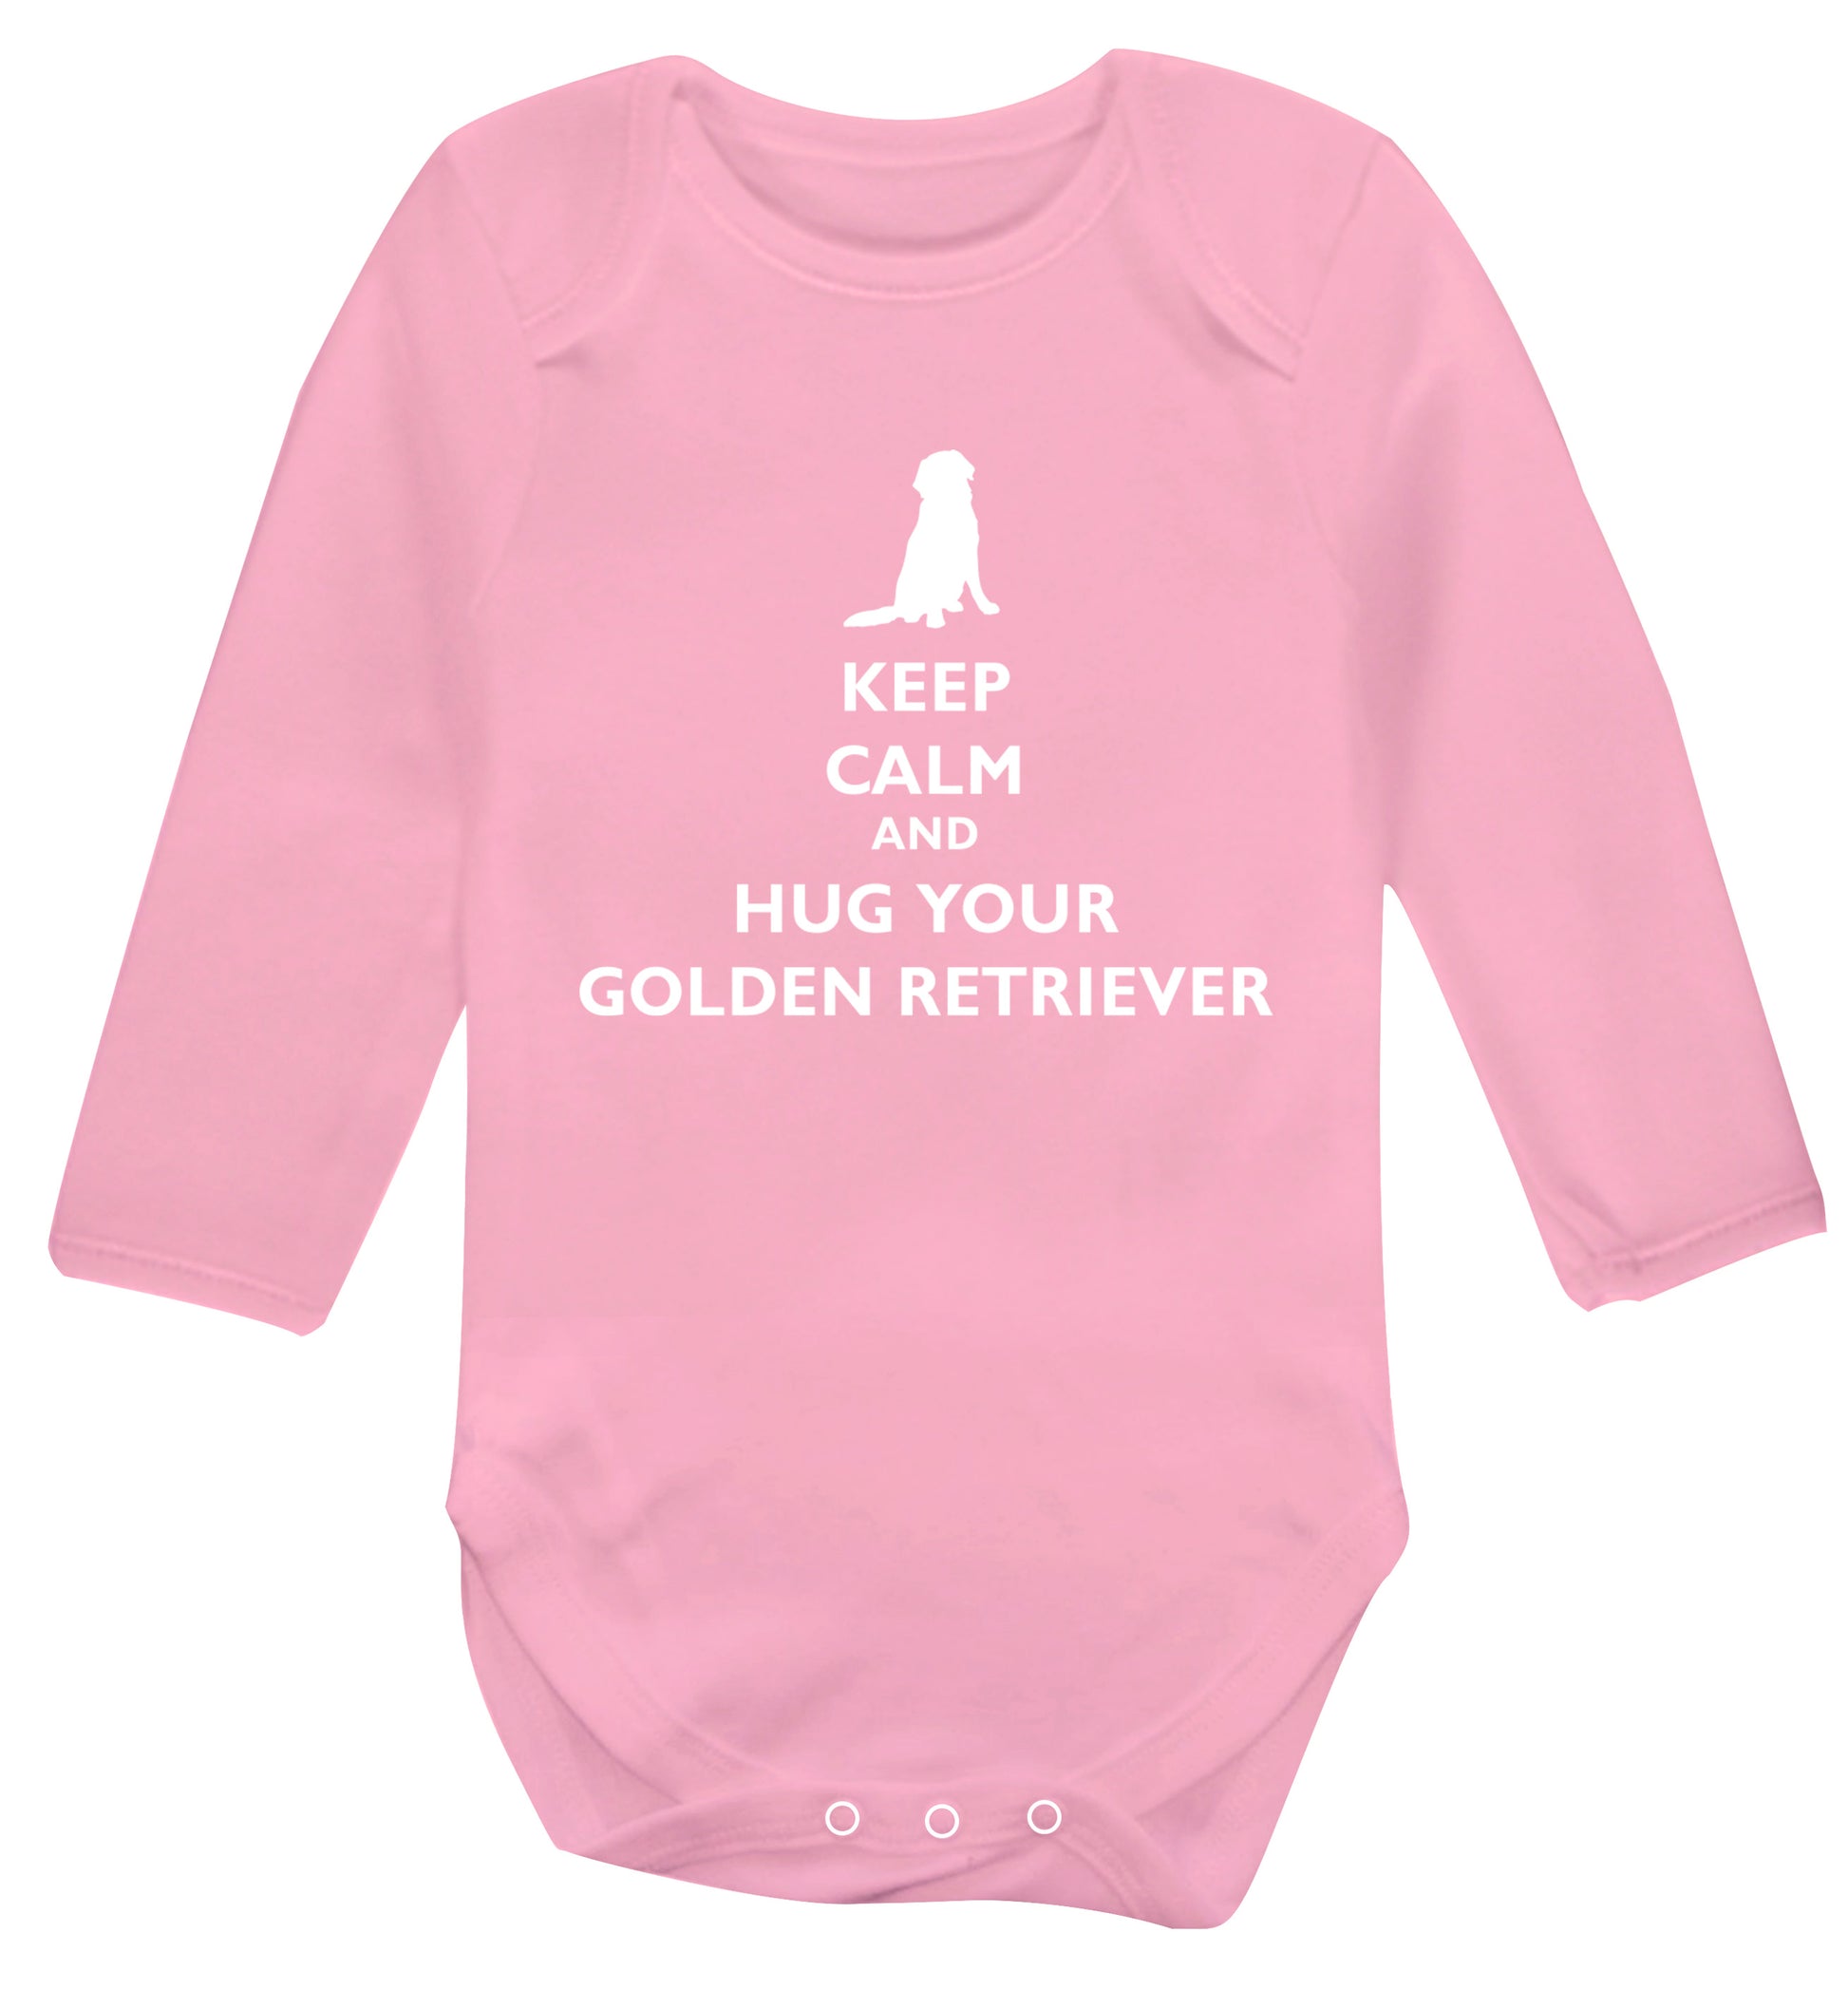 Keep calm and hug your golden retriever Baby Vest long sleeved pale pink 6-12 months